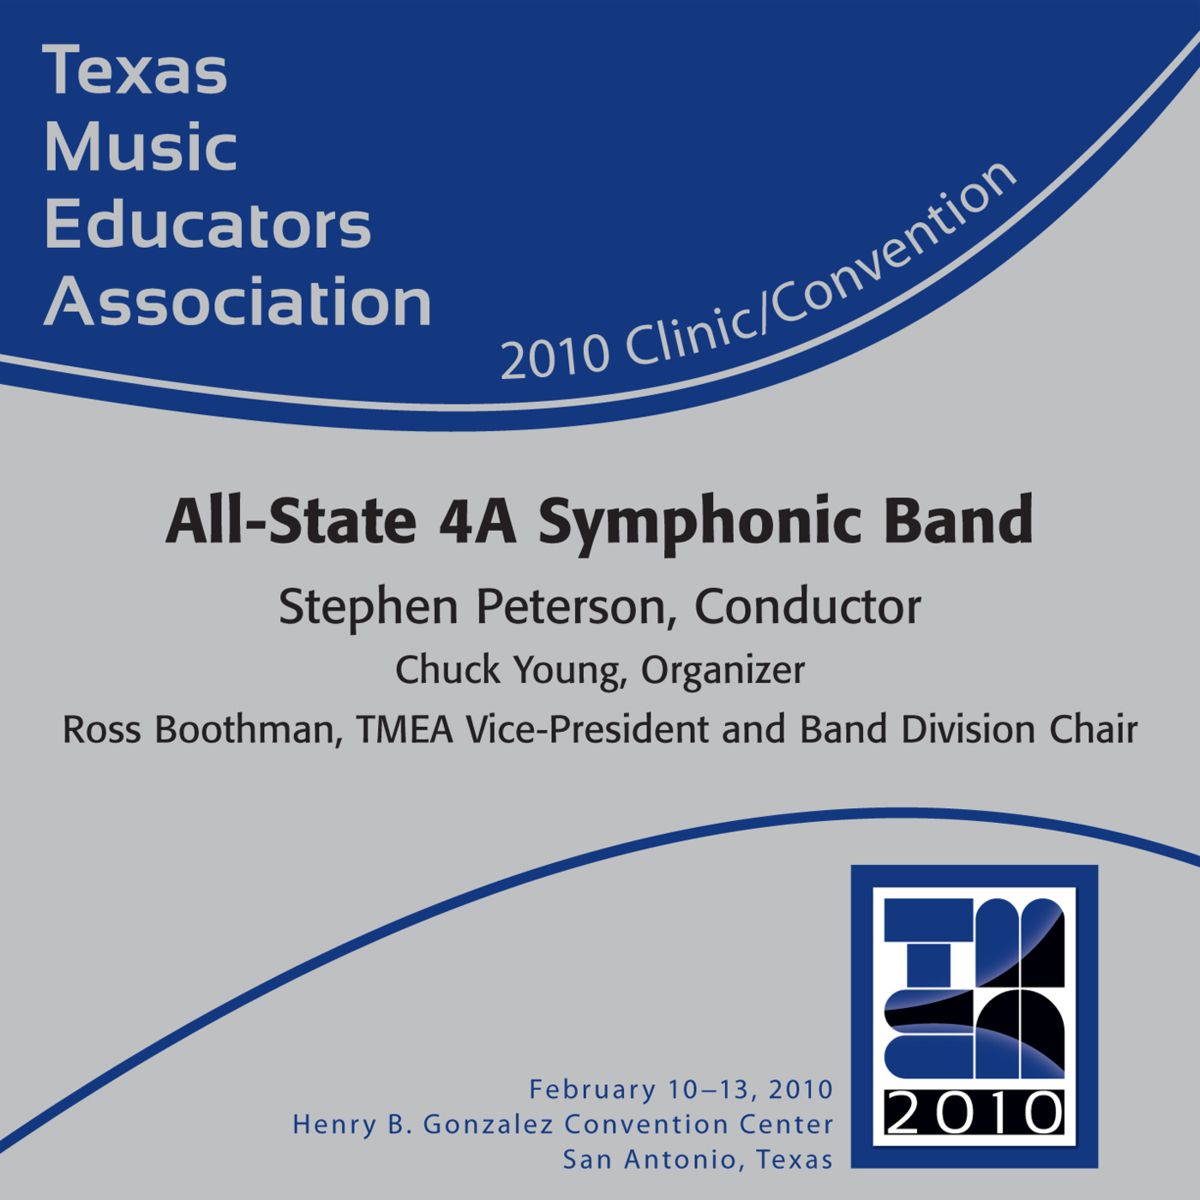 2010 Texas Music Educators Association: All-State 4A Symphonic Band - click here